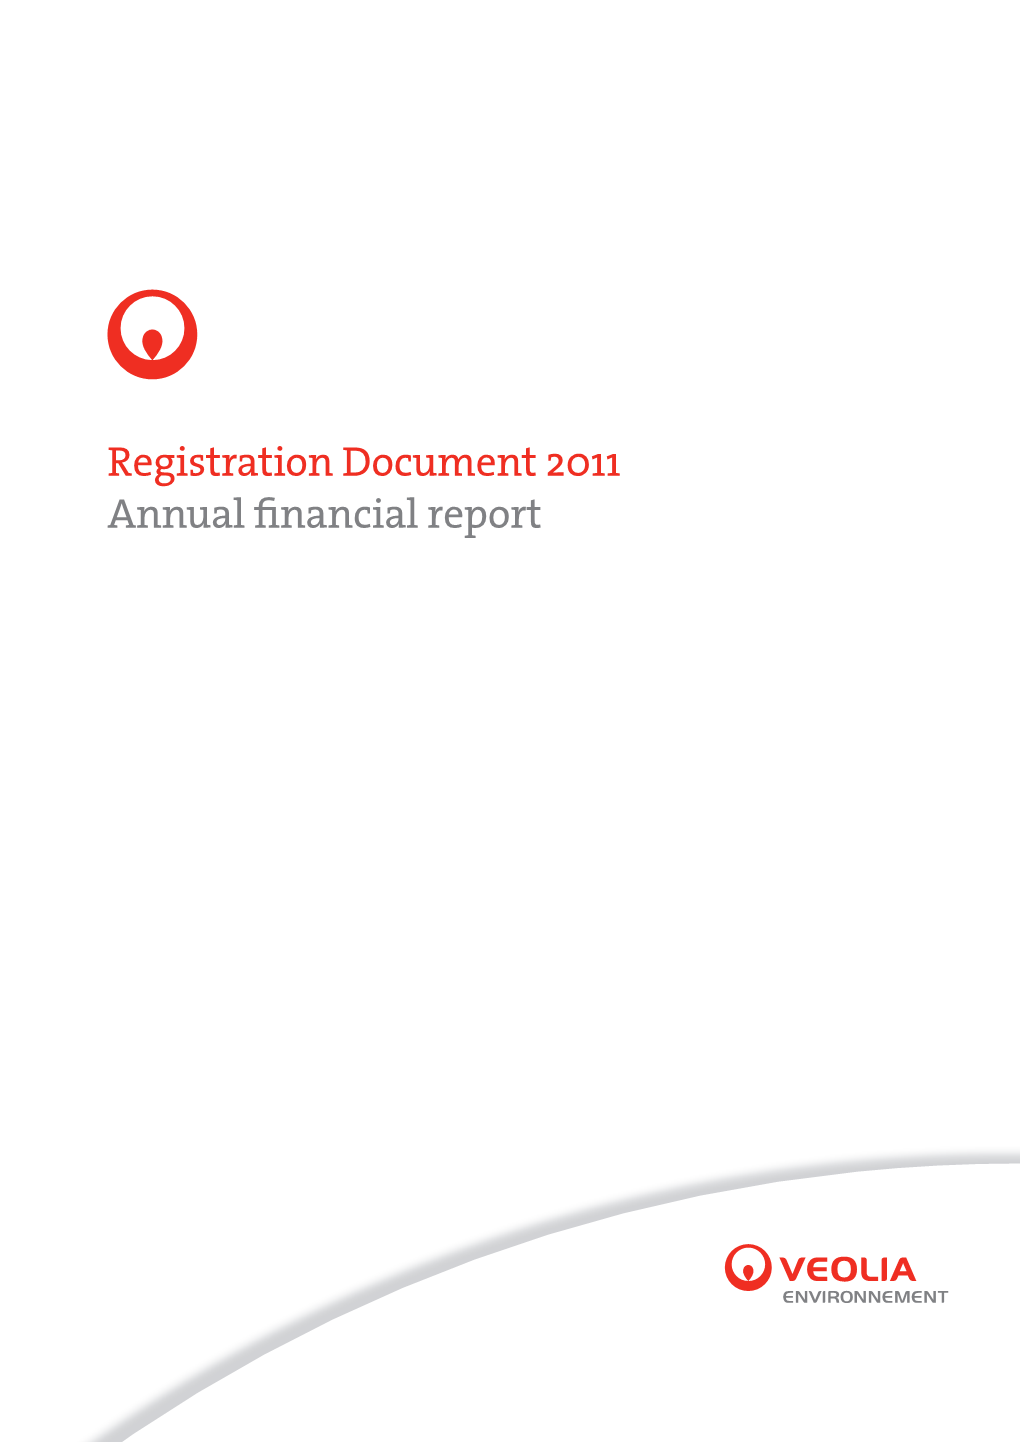 Registration Document 2011 Annual Financial Report